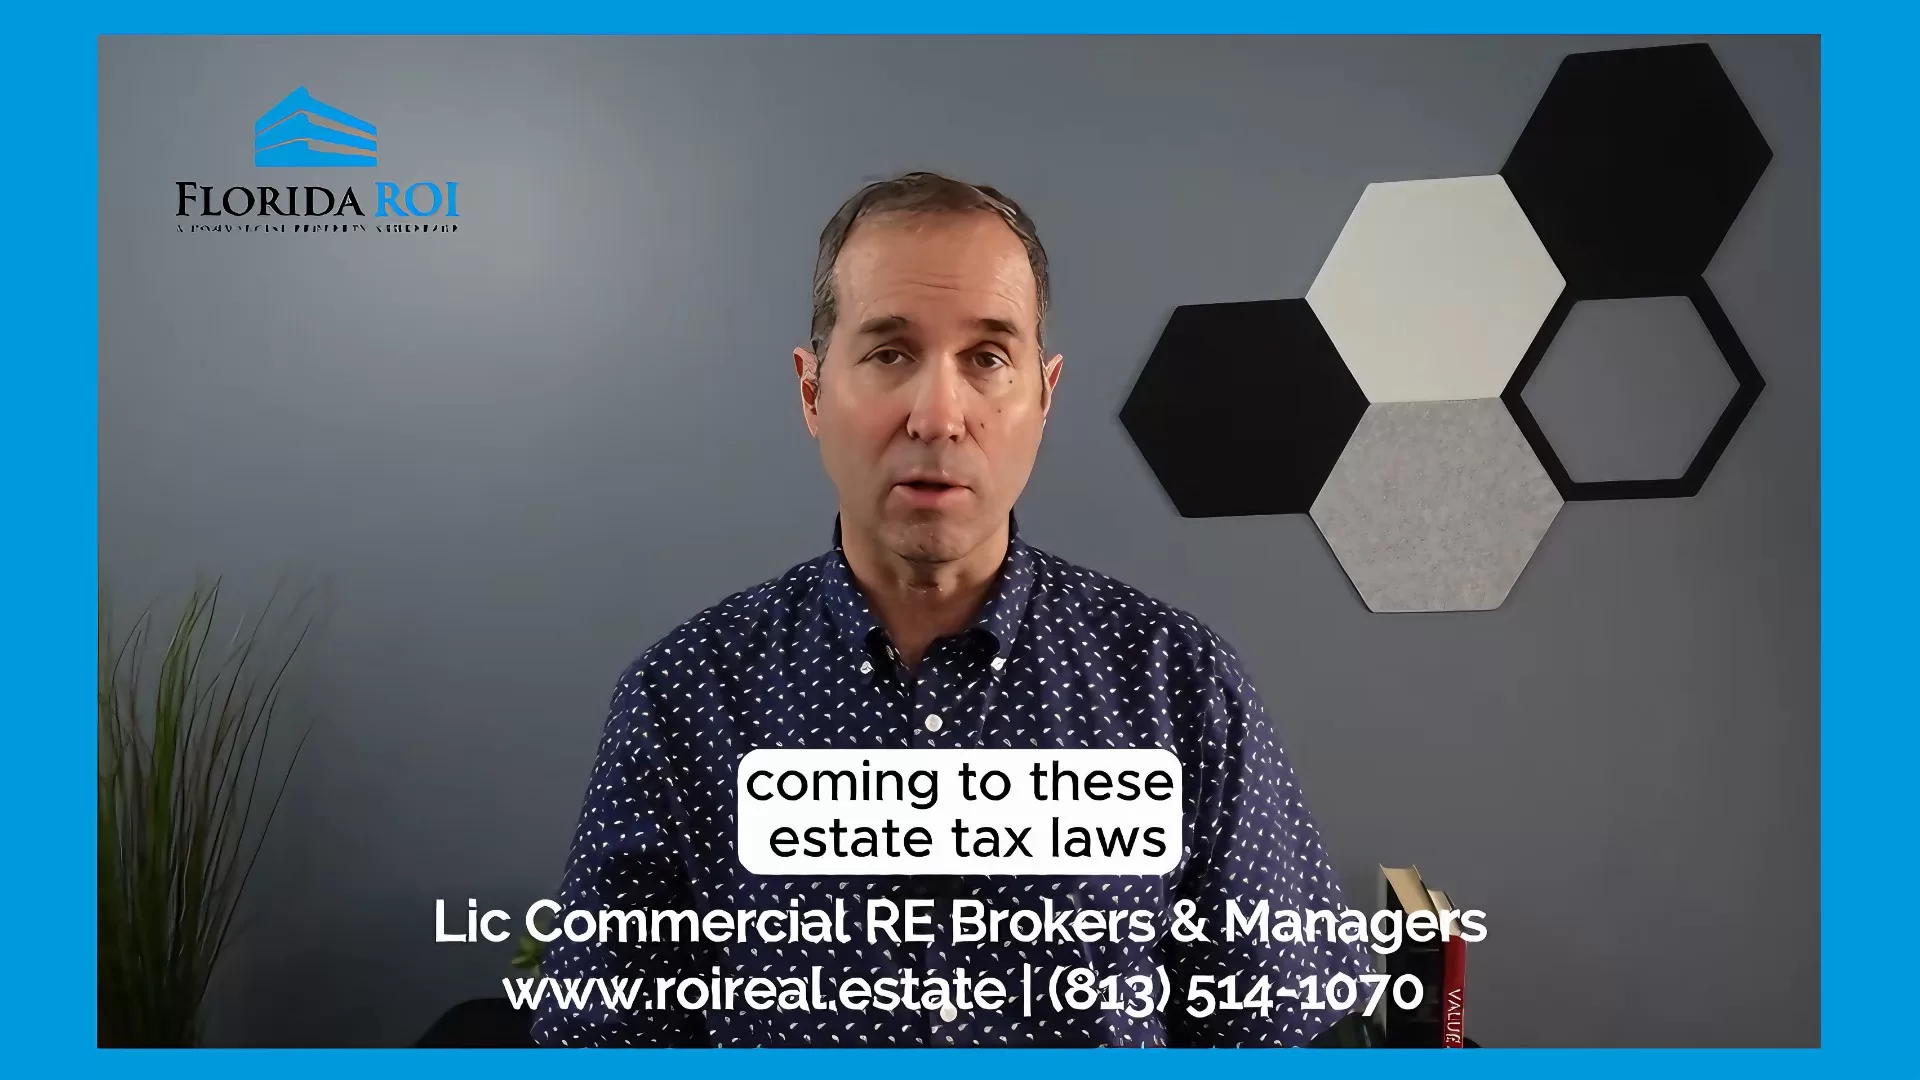 Potential Changes to Estate Tax Laws